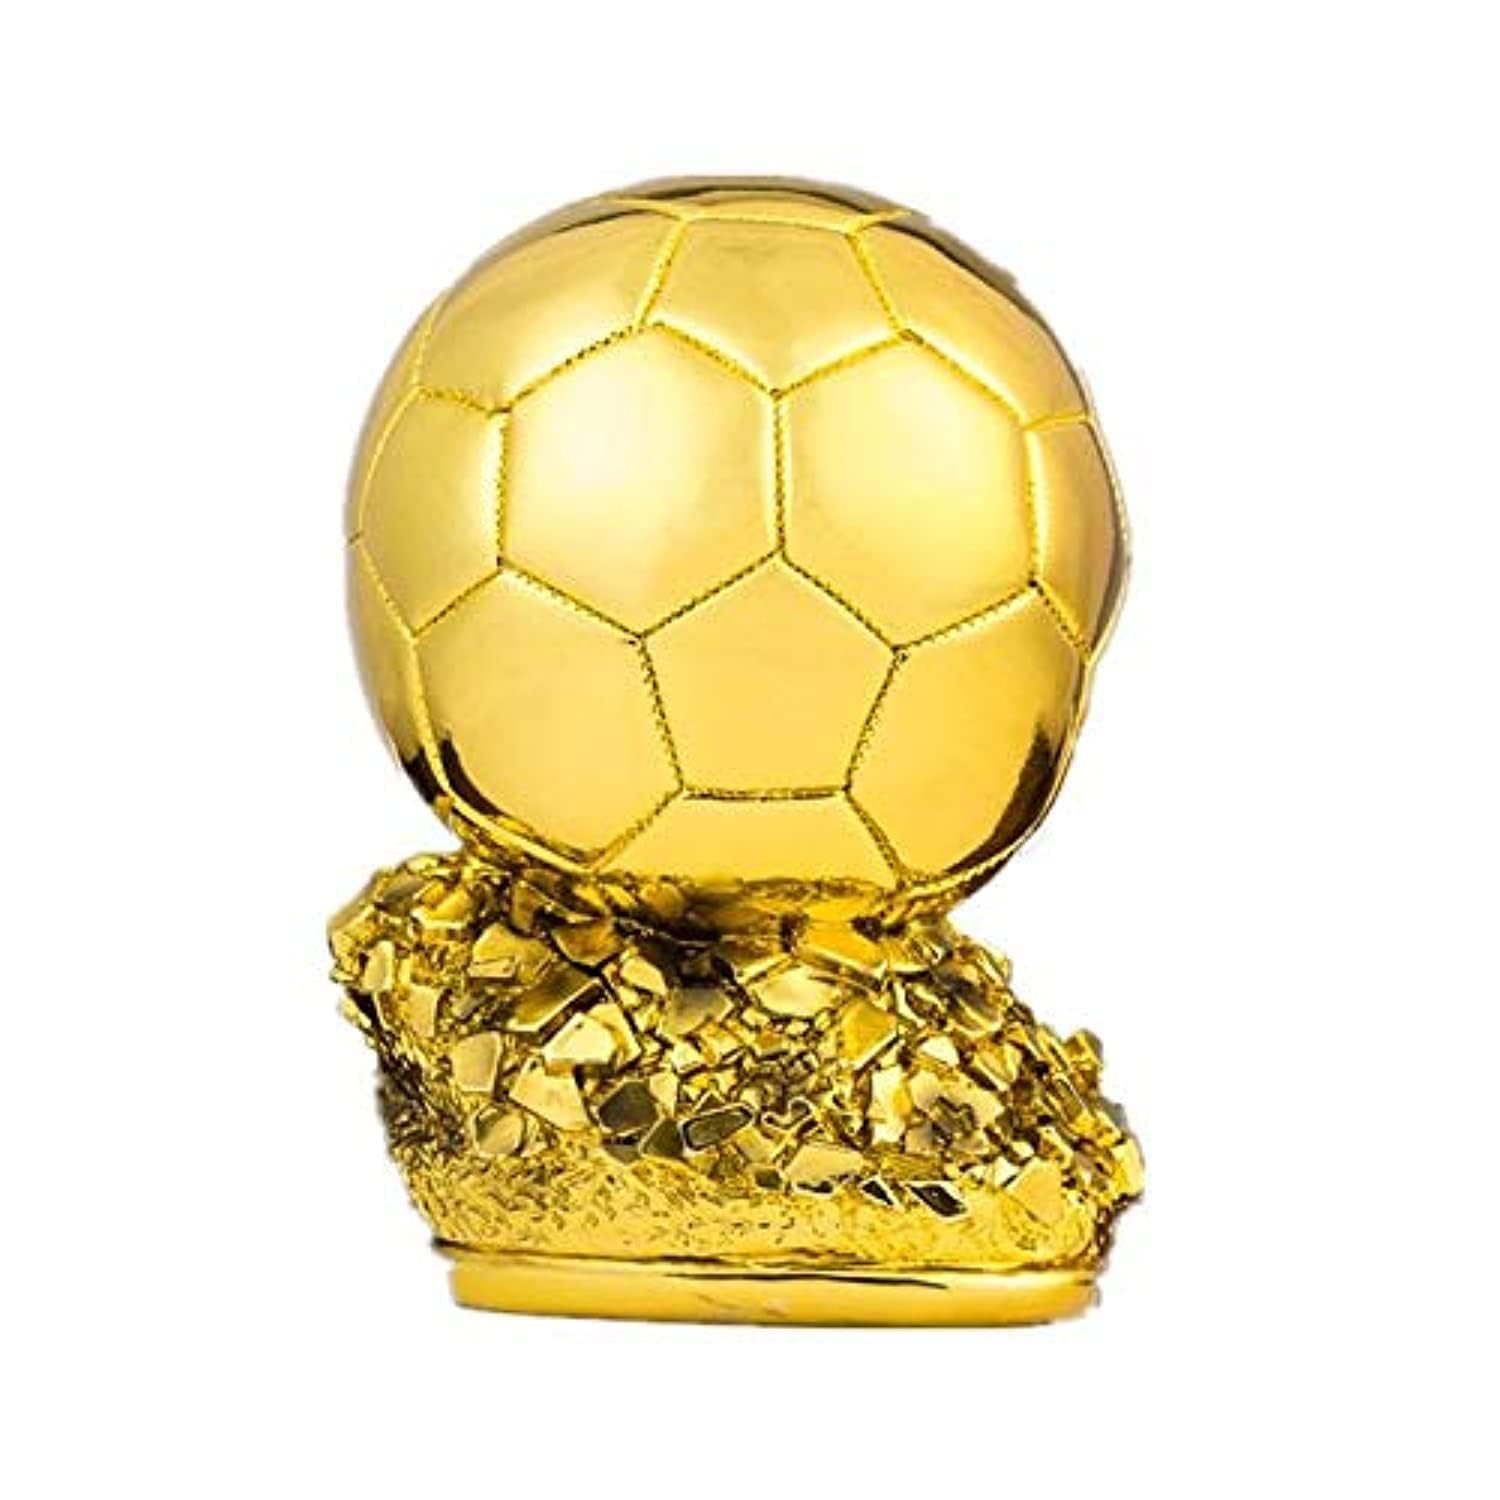 Resin craftwork 2018 football World Cup Creative gifts electroplating golden ball trophy